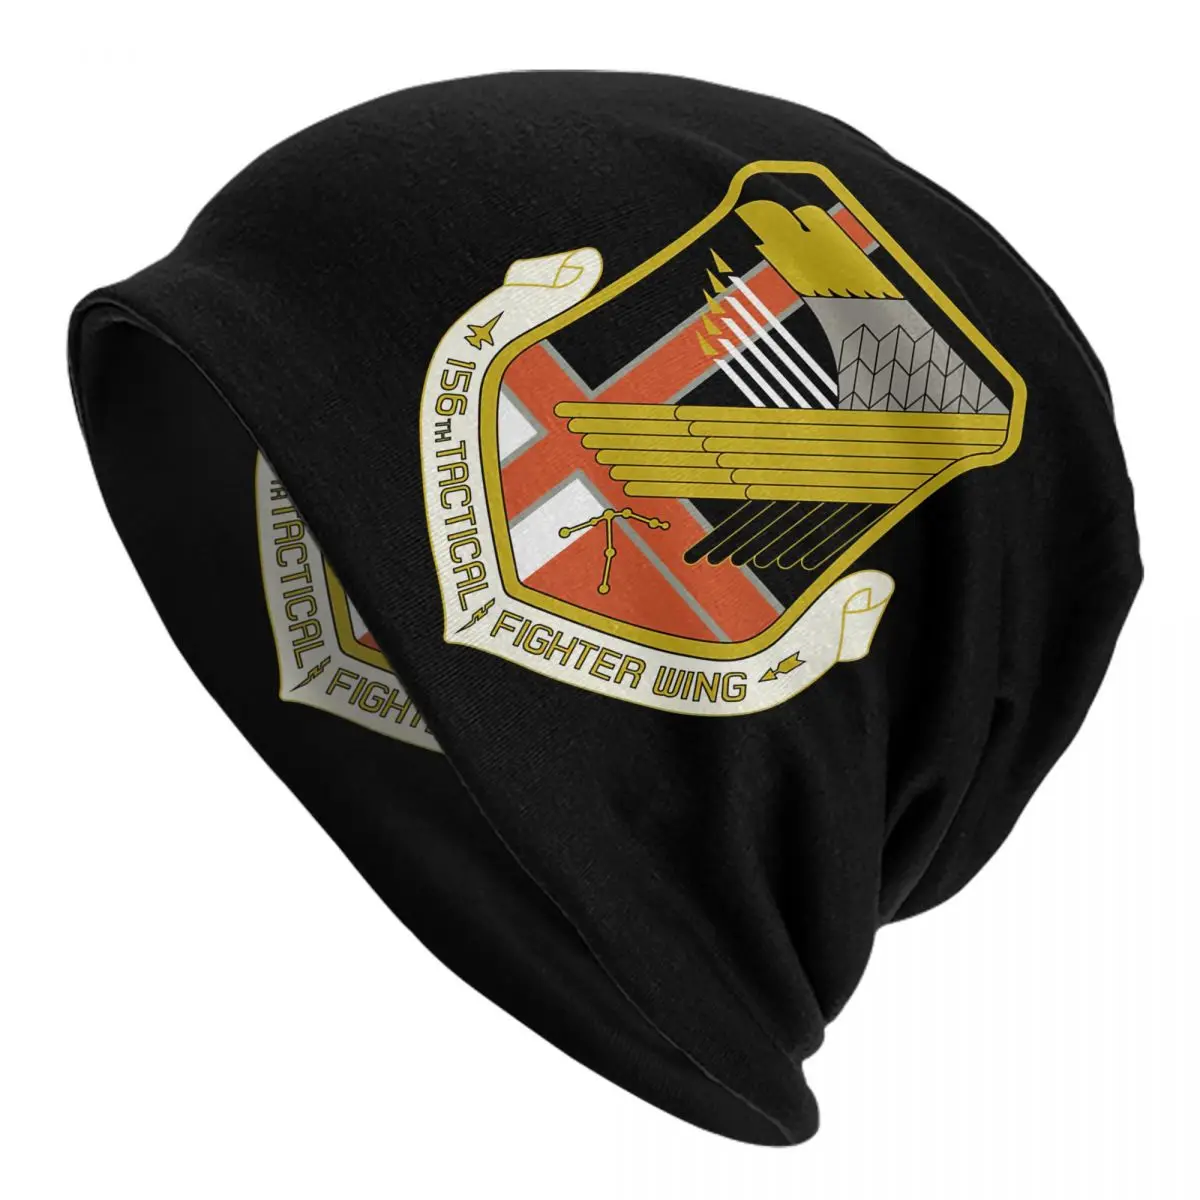 Ace Combat Yellow Squadron Adult Men's Women's Knit Hat Keep warm winter Funny knitted hat